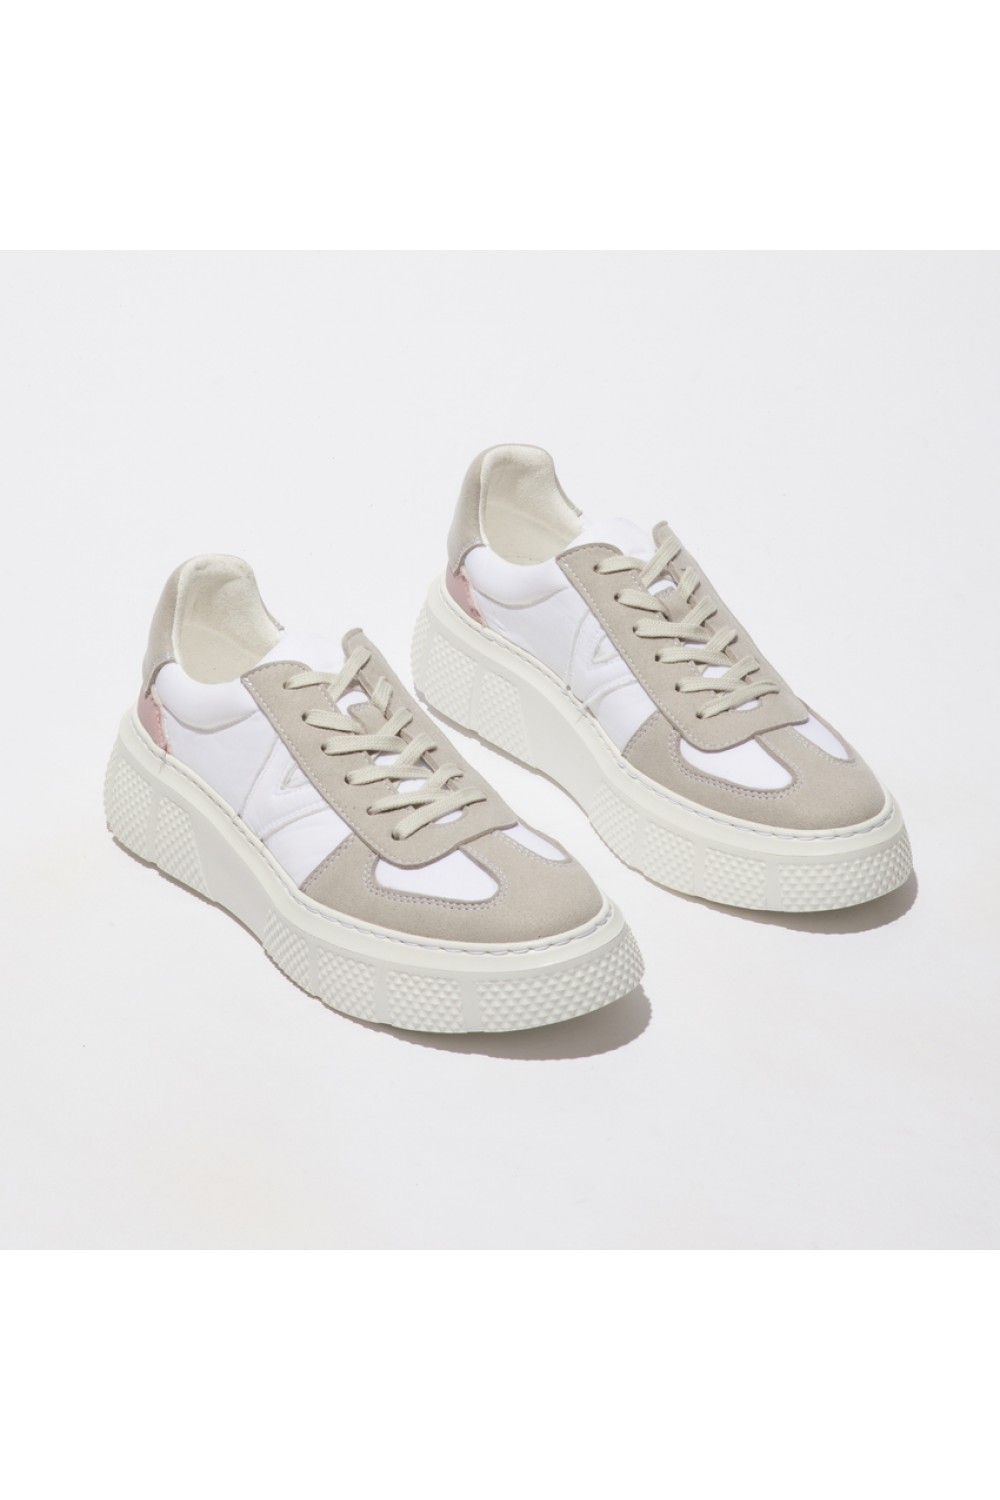 FLY LONDON Essa511 Chunky Trainer White Lilac